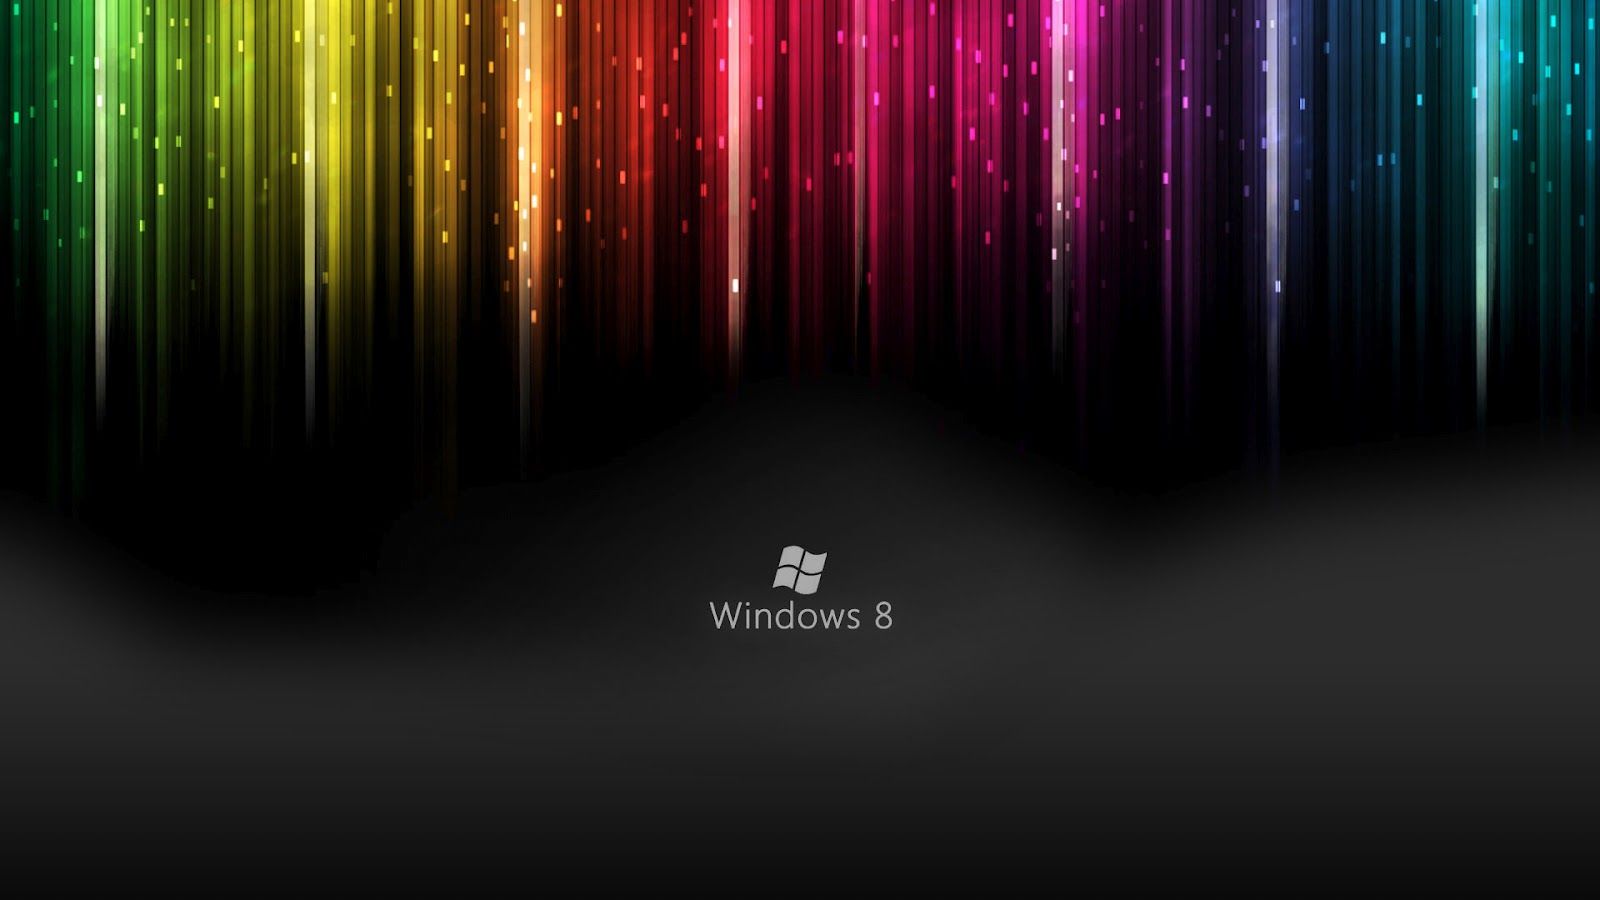 Colorful Background HD Wallpapers for Windows 8